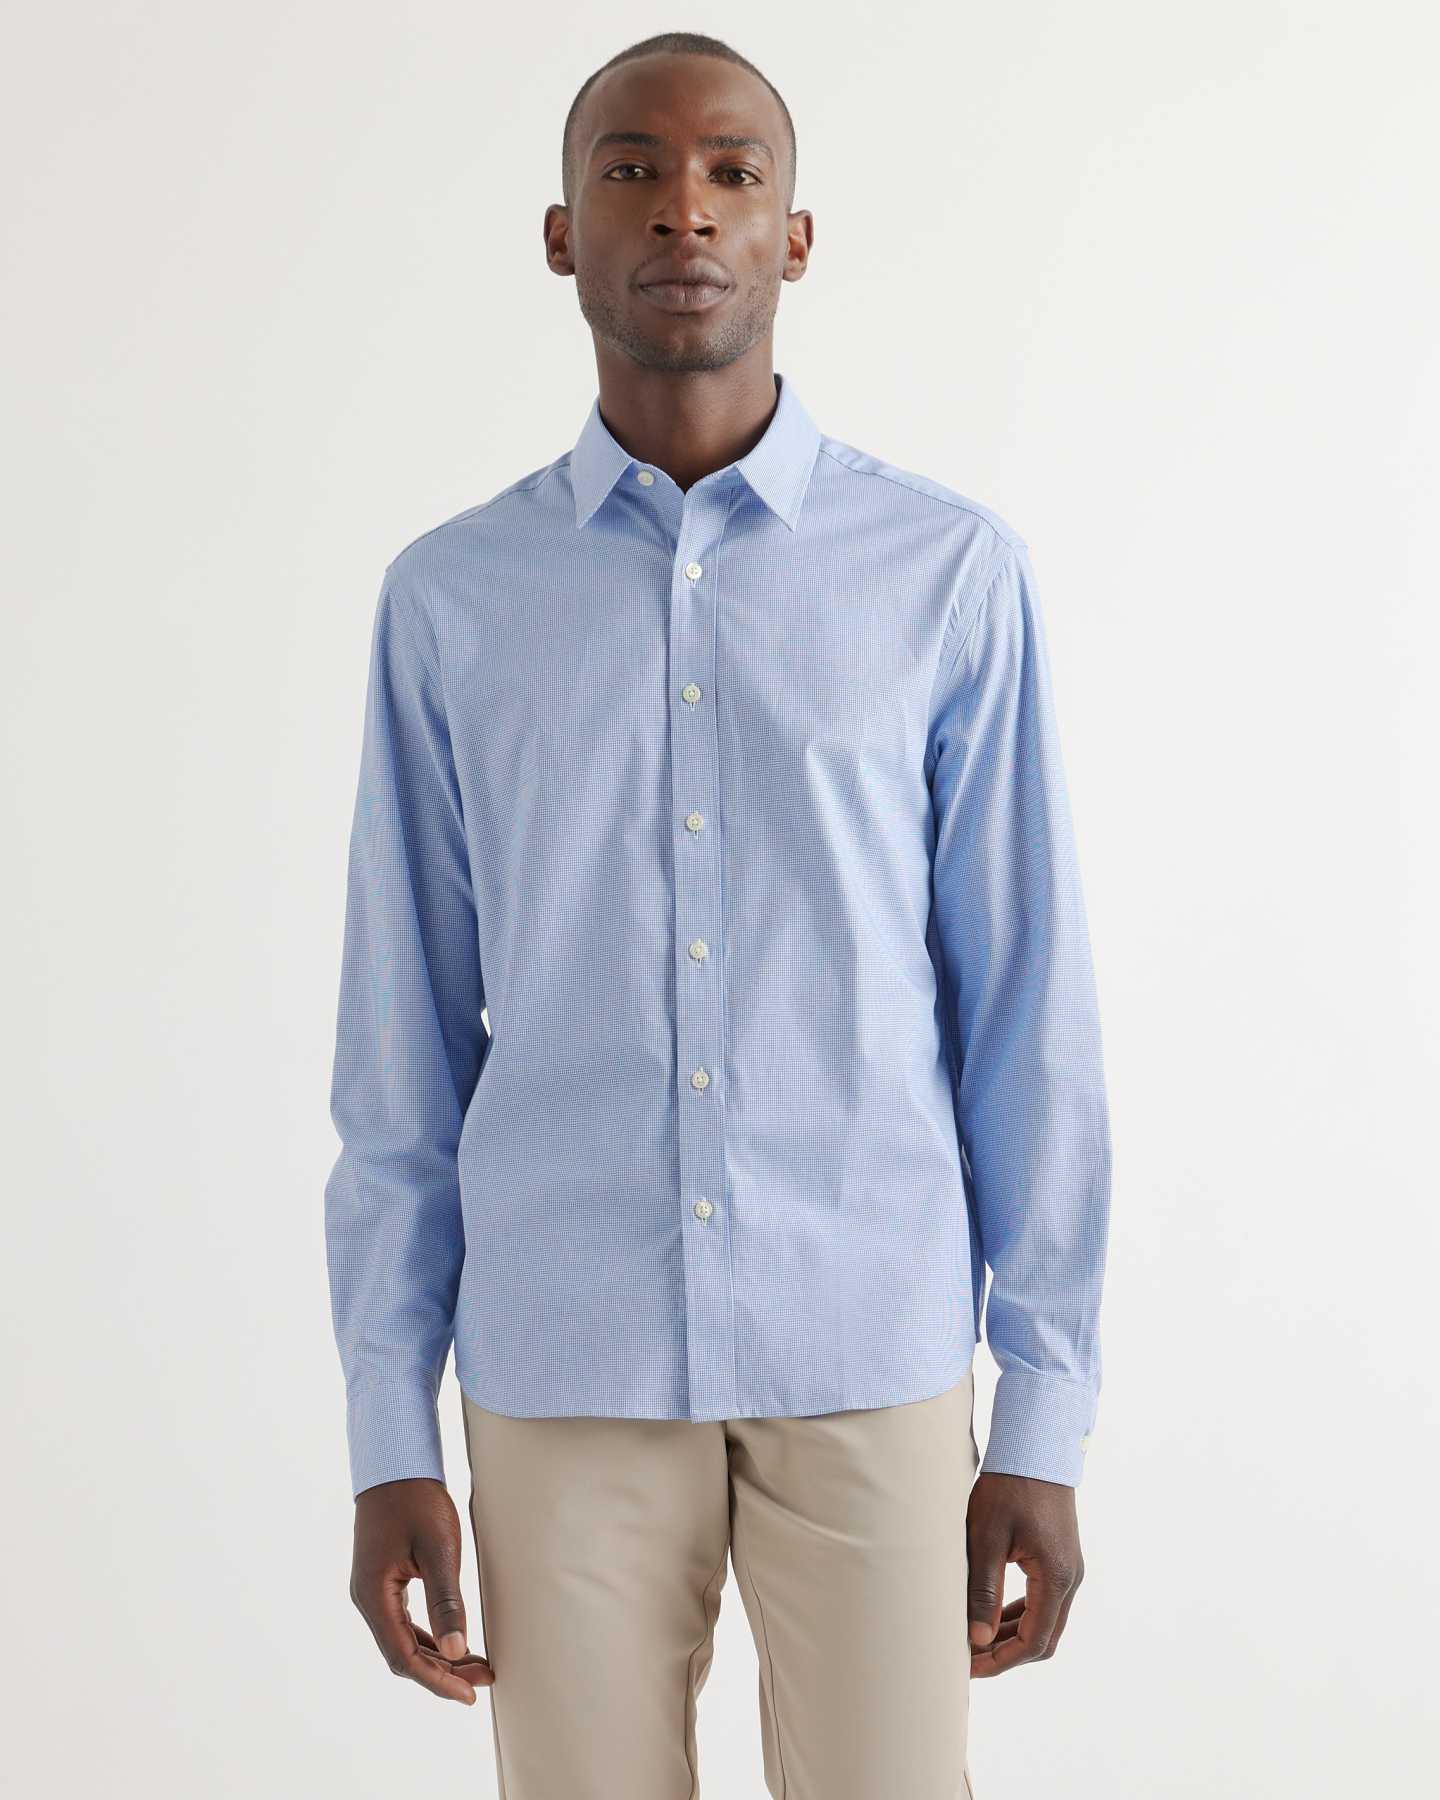 The Untucked Dress Shirt - Admiral Blue Pin Pattern